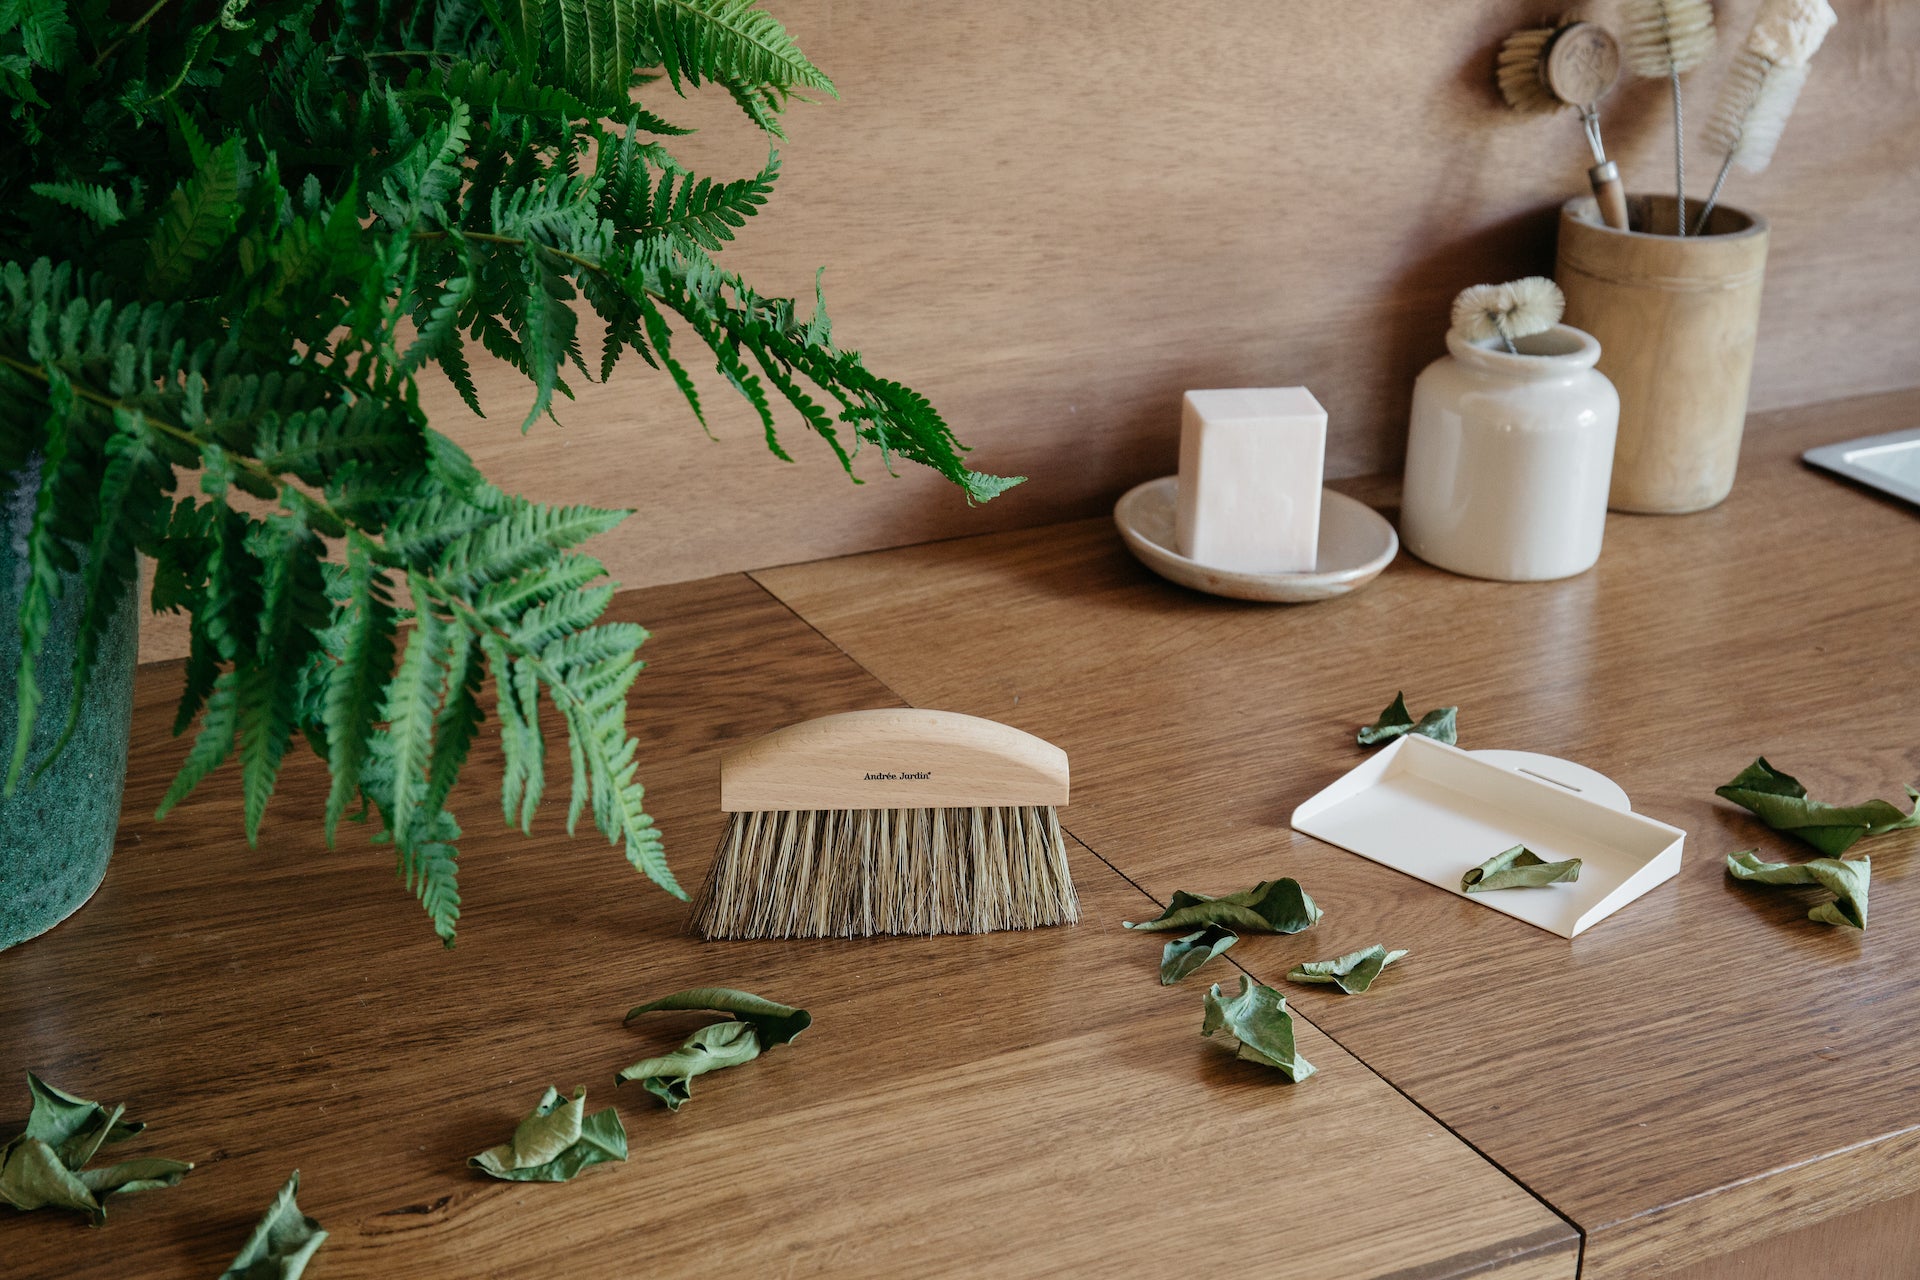 Andrée Jardin Mr. and Mrs. Clynk Natural Table Brush and Dustpan Set Utilities Andrée Jardin Back in stock Brand_Andrée Jardin Home_Broom Sets Home_Household Cleaning New Arrivals coffret-epoussette-ramasse-miettes-clynk-nature-s2-3167_b99f49bd-23ad-4f53-bff1-f2539a8ddf49